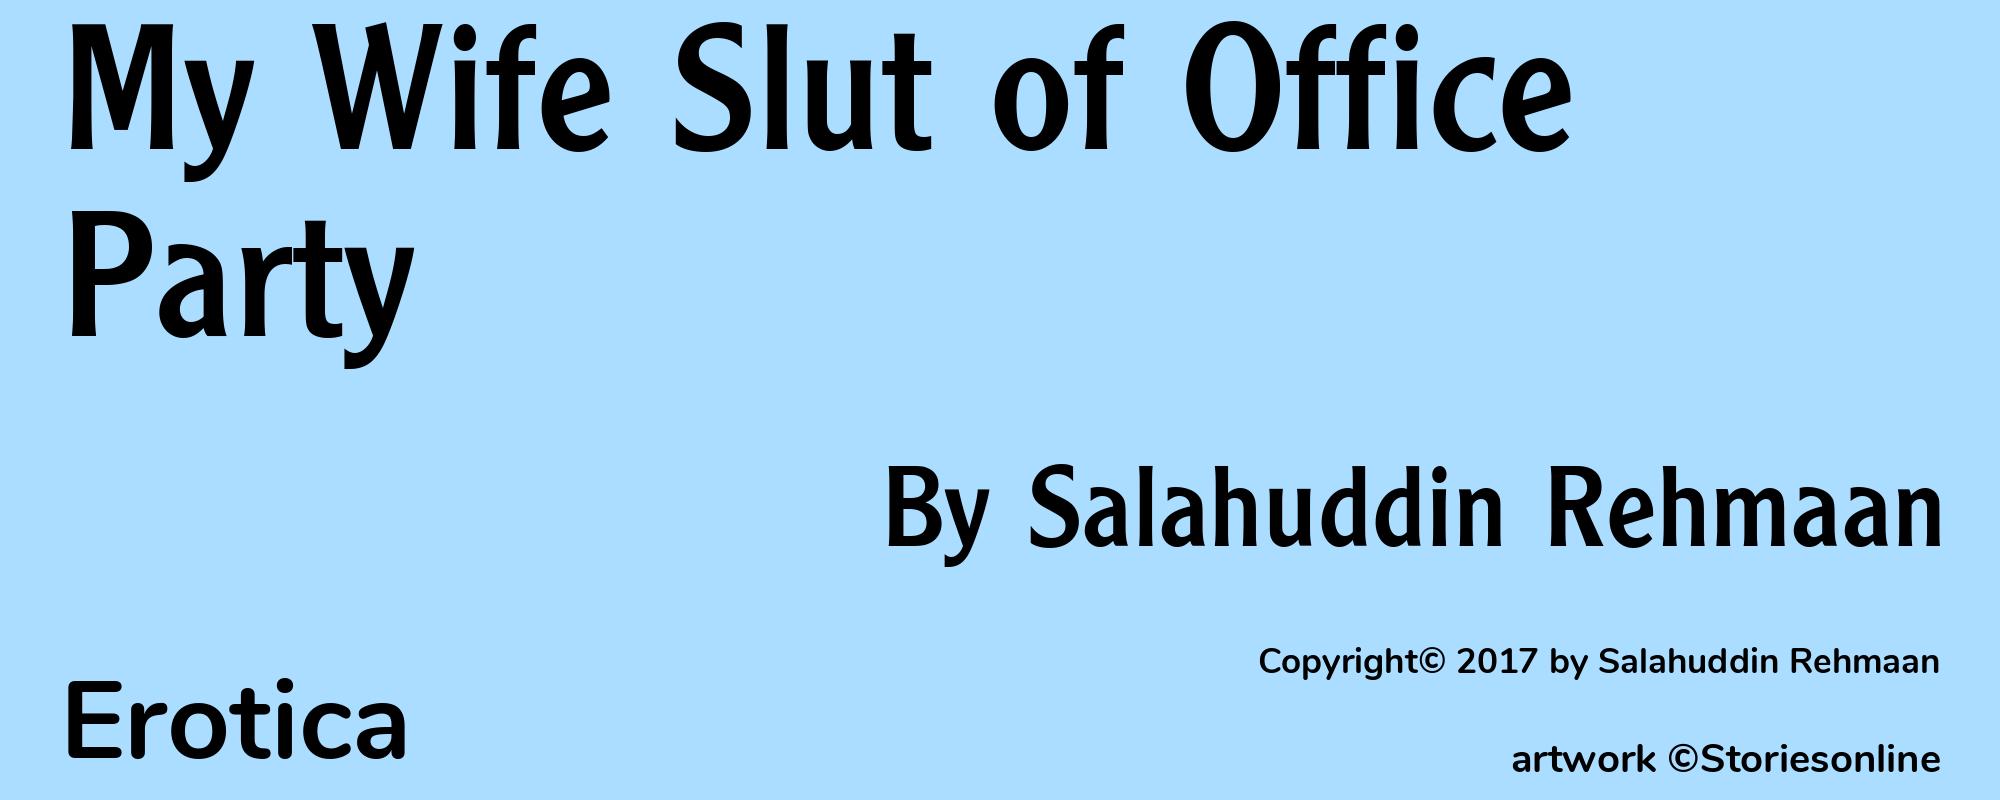 My Wife Slut of Office Party - Cover